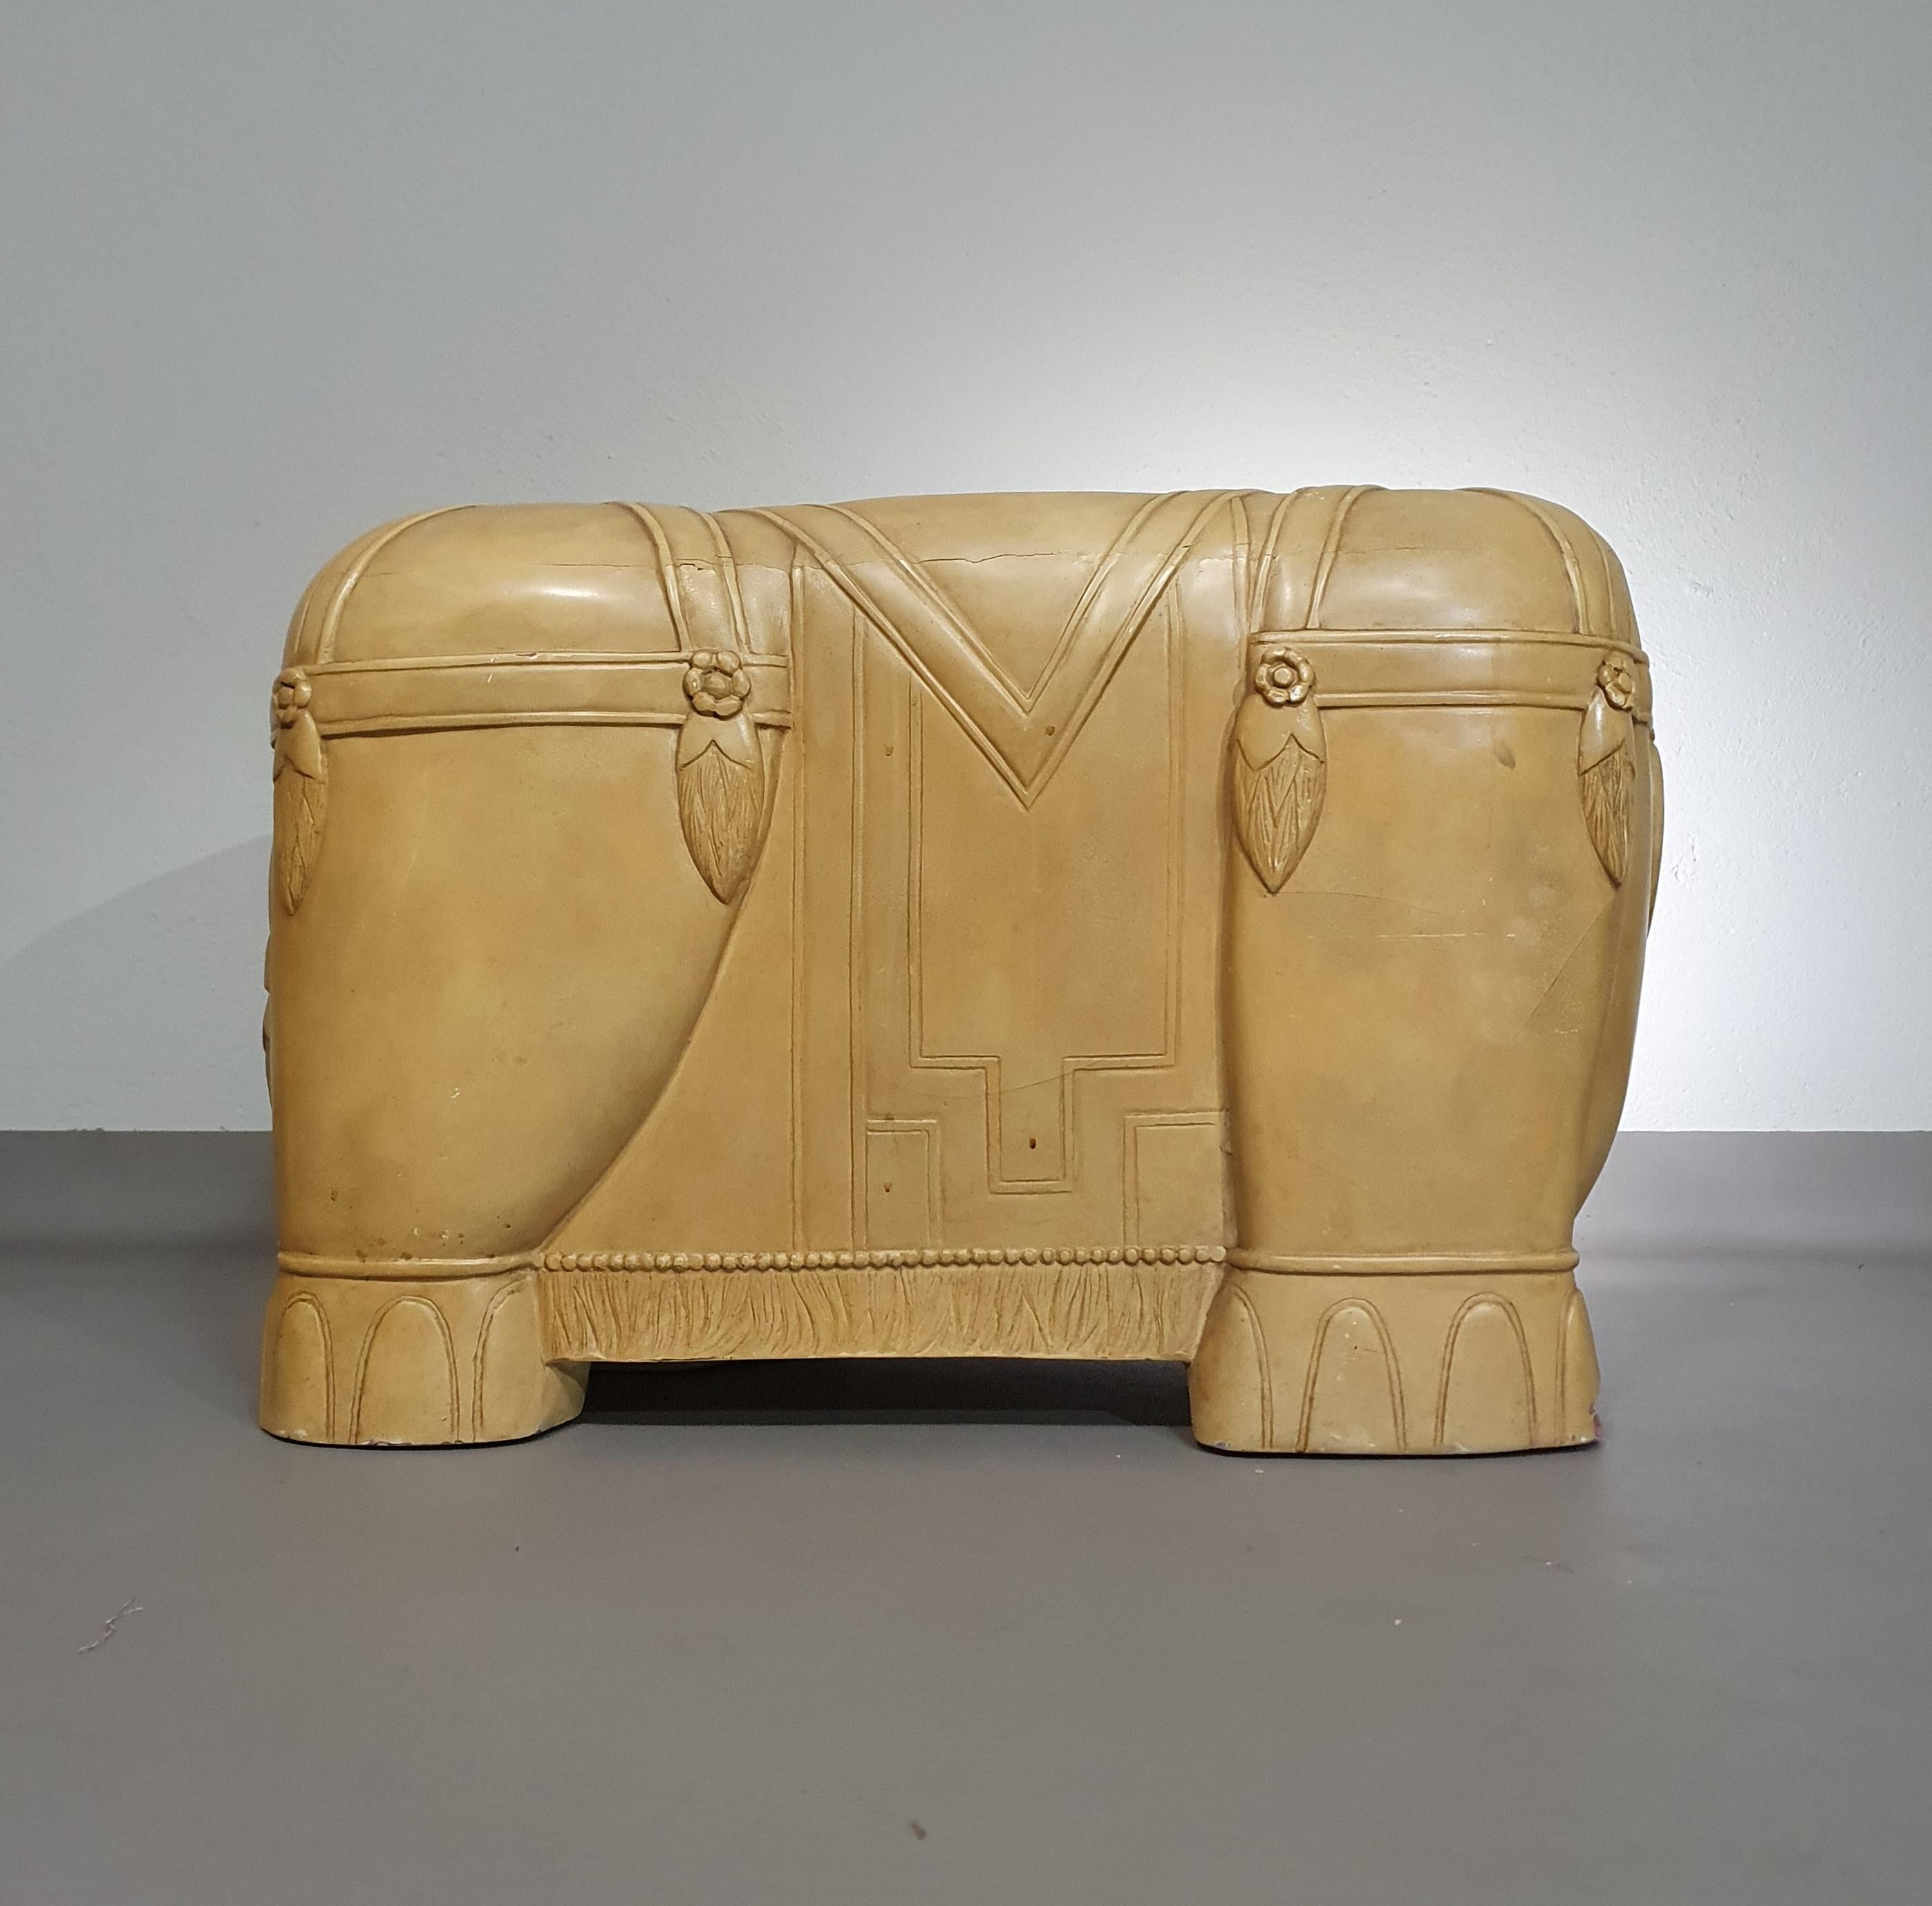 Decorative wood and resin elephant form table For Sale 13